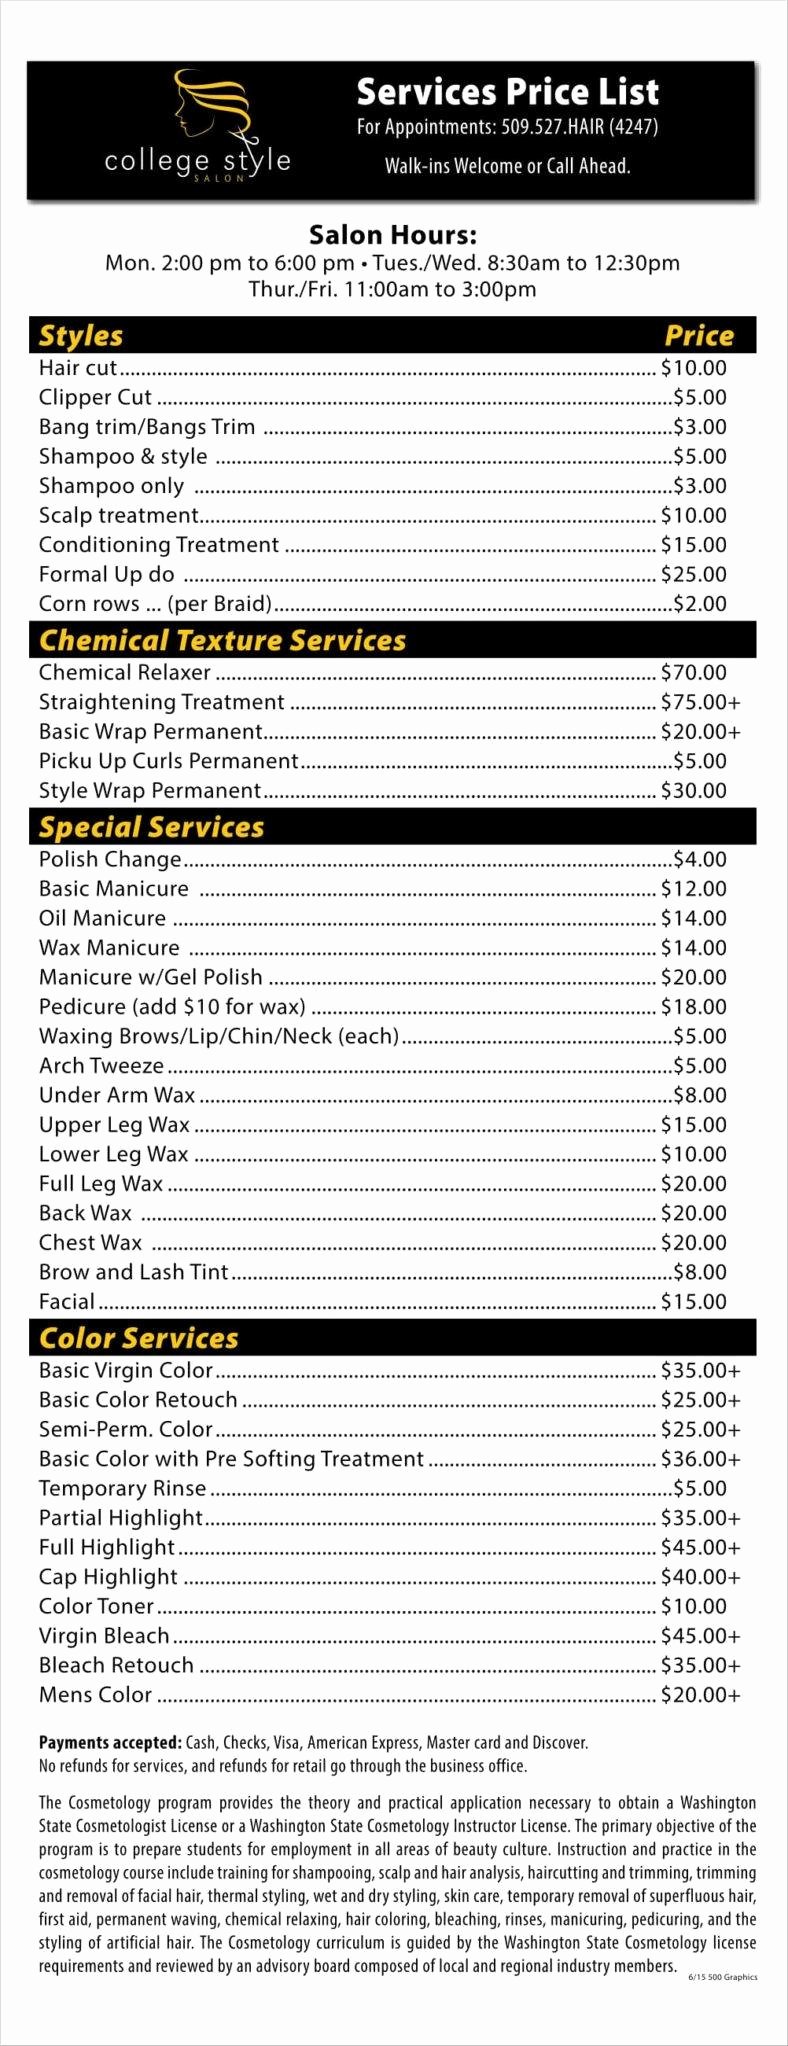 Services Price List Template Fresh 9 Salon Price List Templates Free Samples Examples formats Download